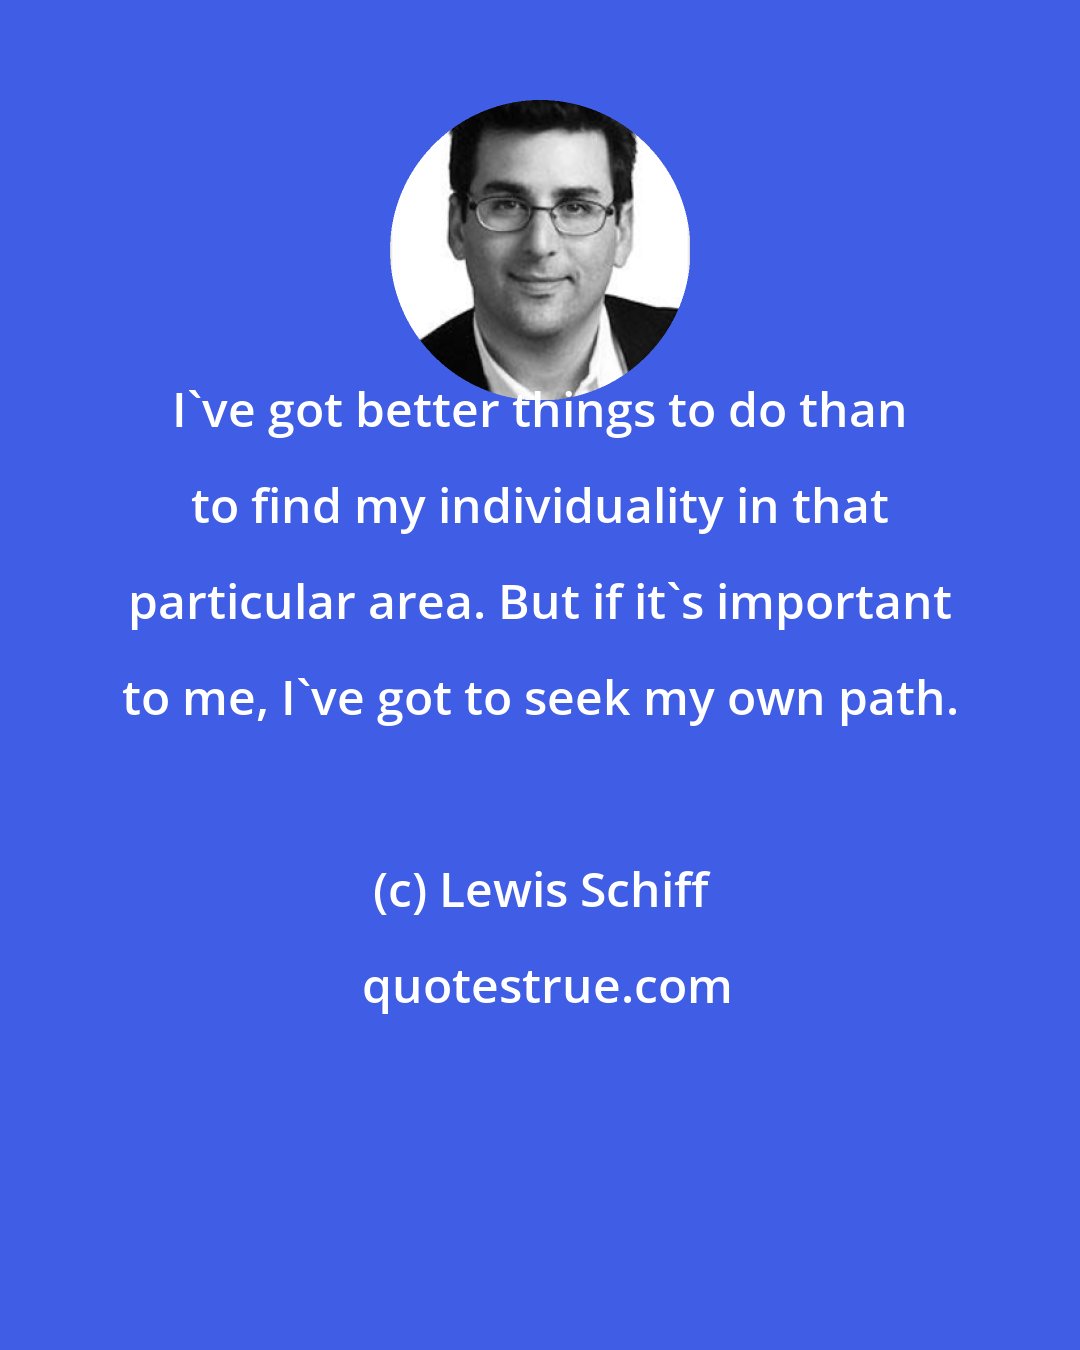 Lewis Schiff: I've got better things to do than to find my individuality in that particular area. But if it's important to me, I've got to seek my own path.